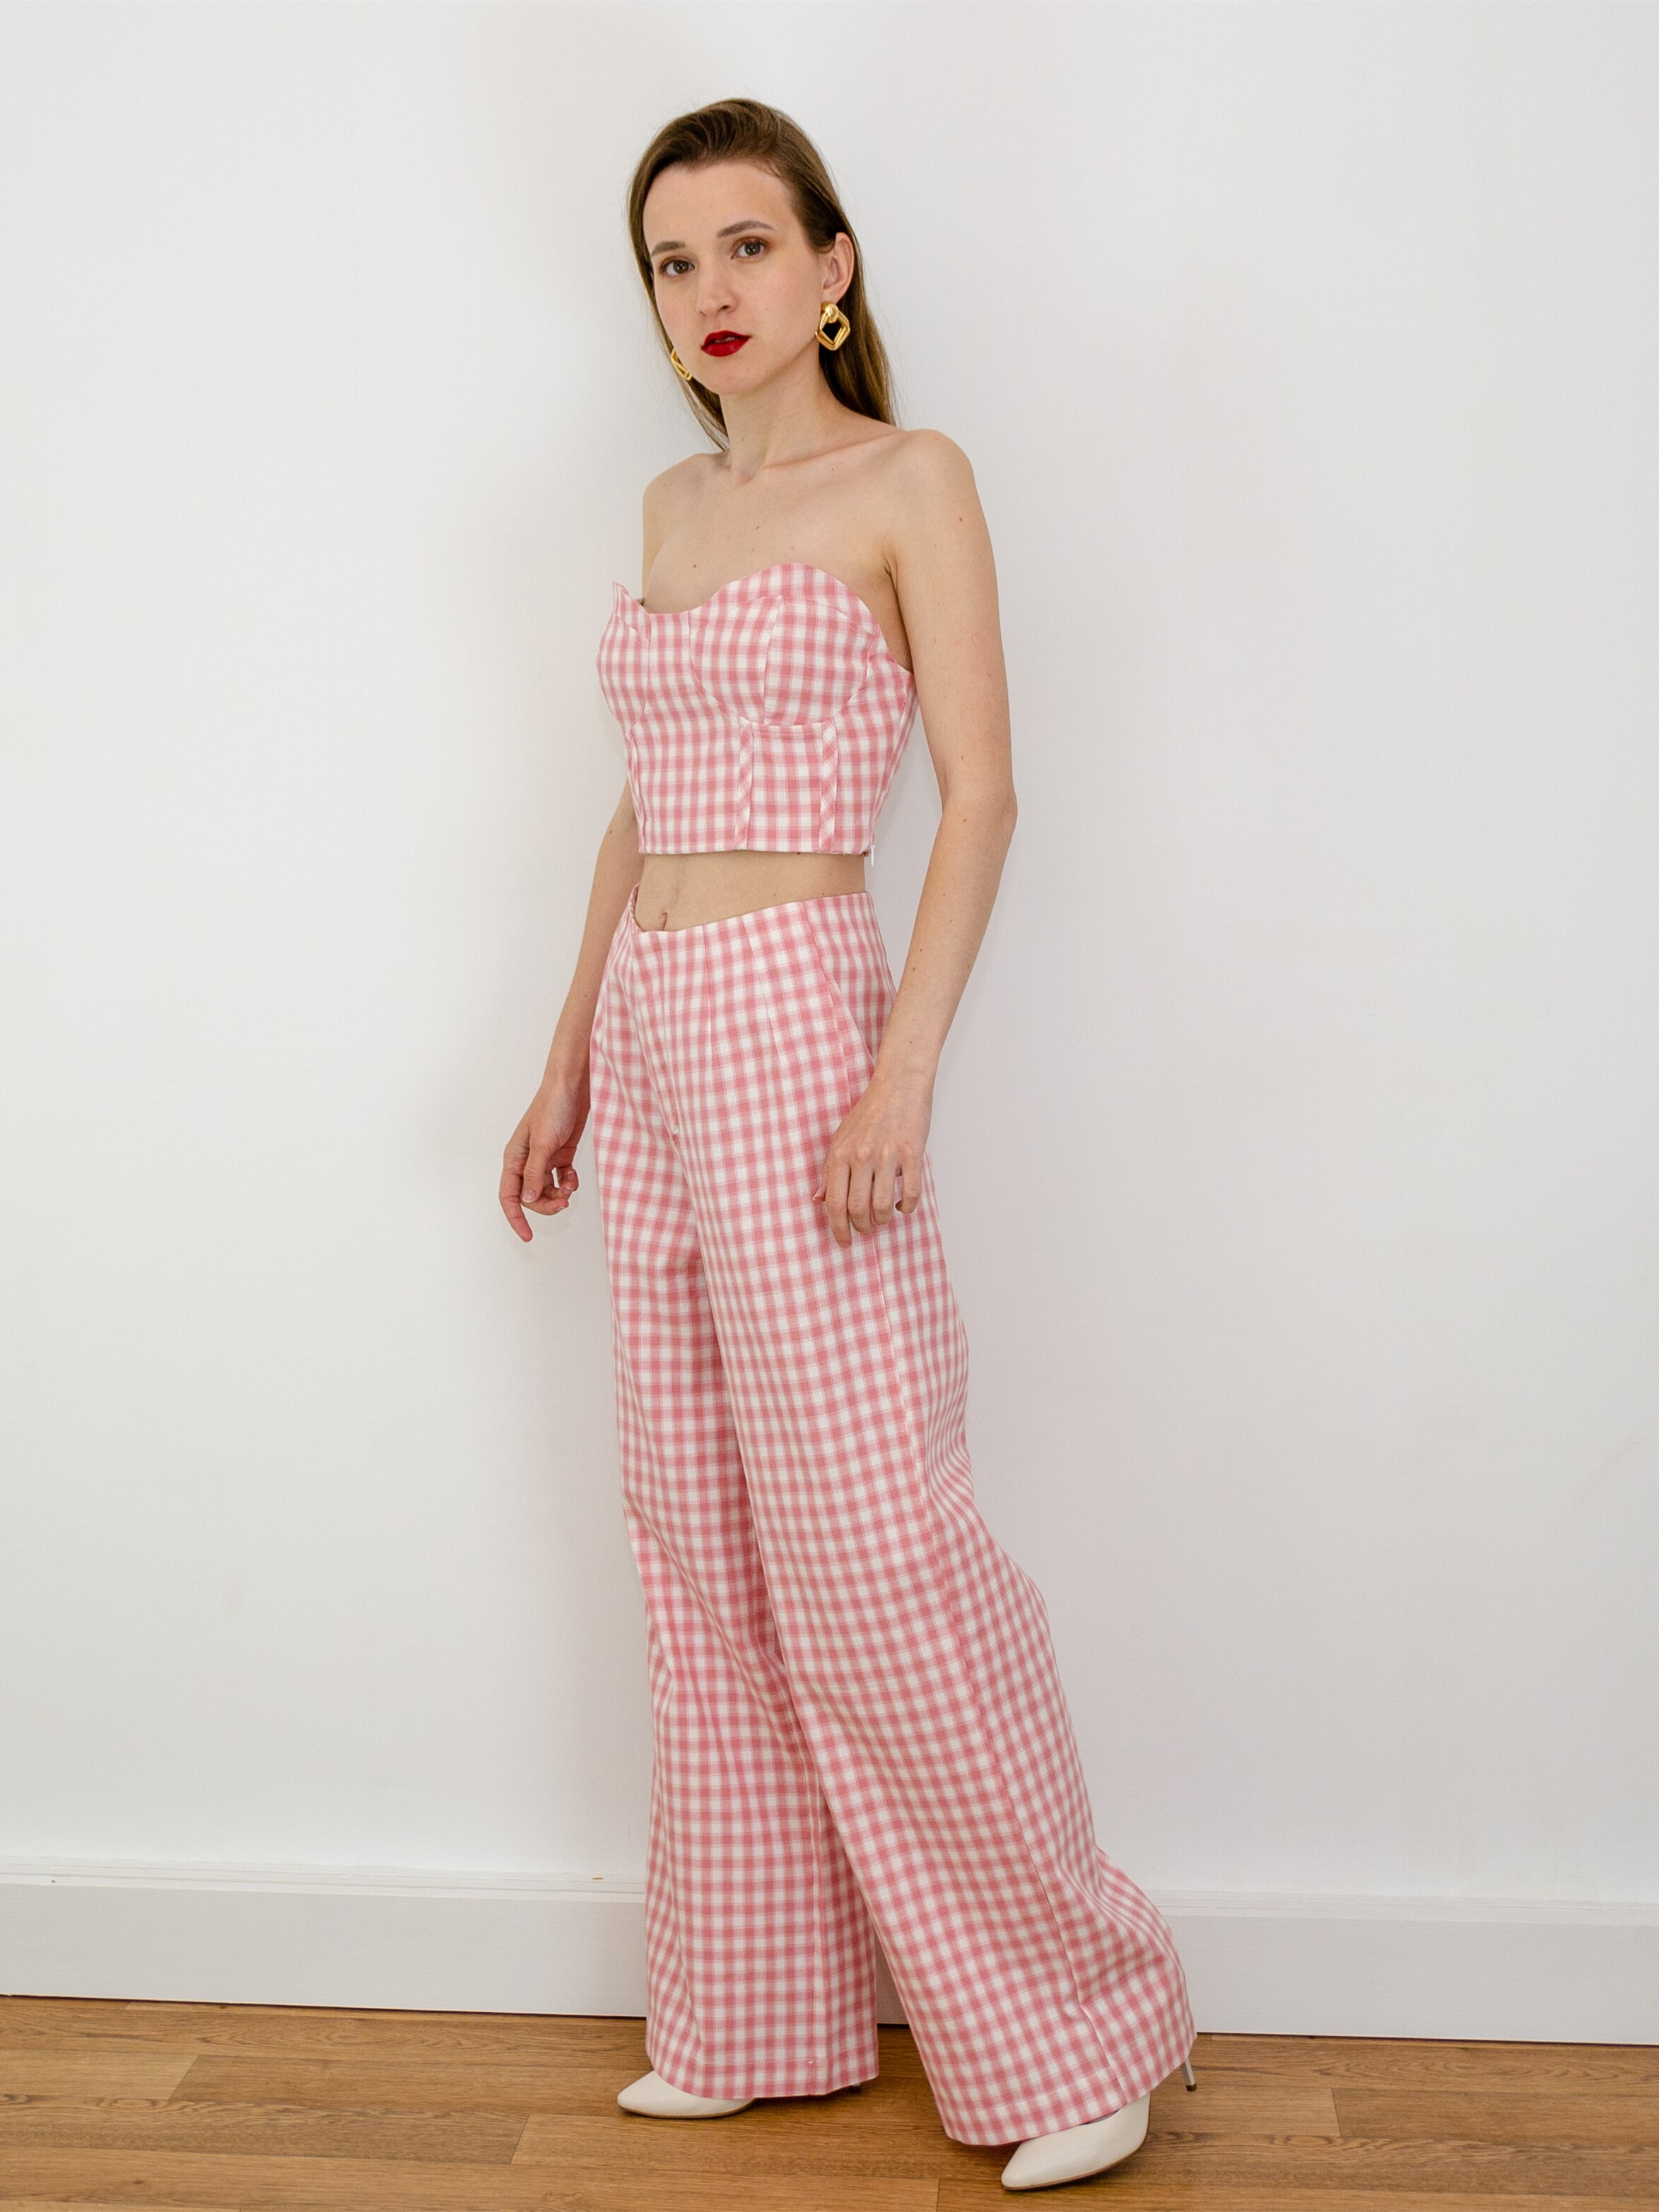 PTYSIC-Women-Fashion-Plaid-Bright-Line-Decoration-Cropped-Corset-Straight-Pants-2022-Summer-Streetwear-Two-Piece-2